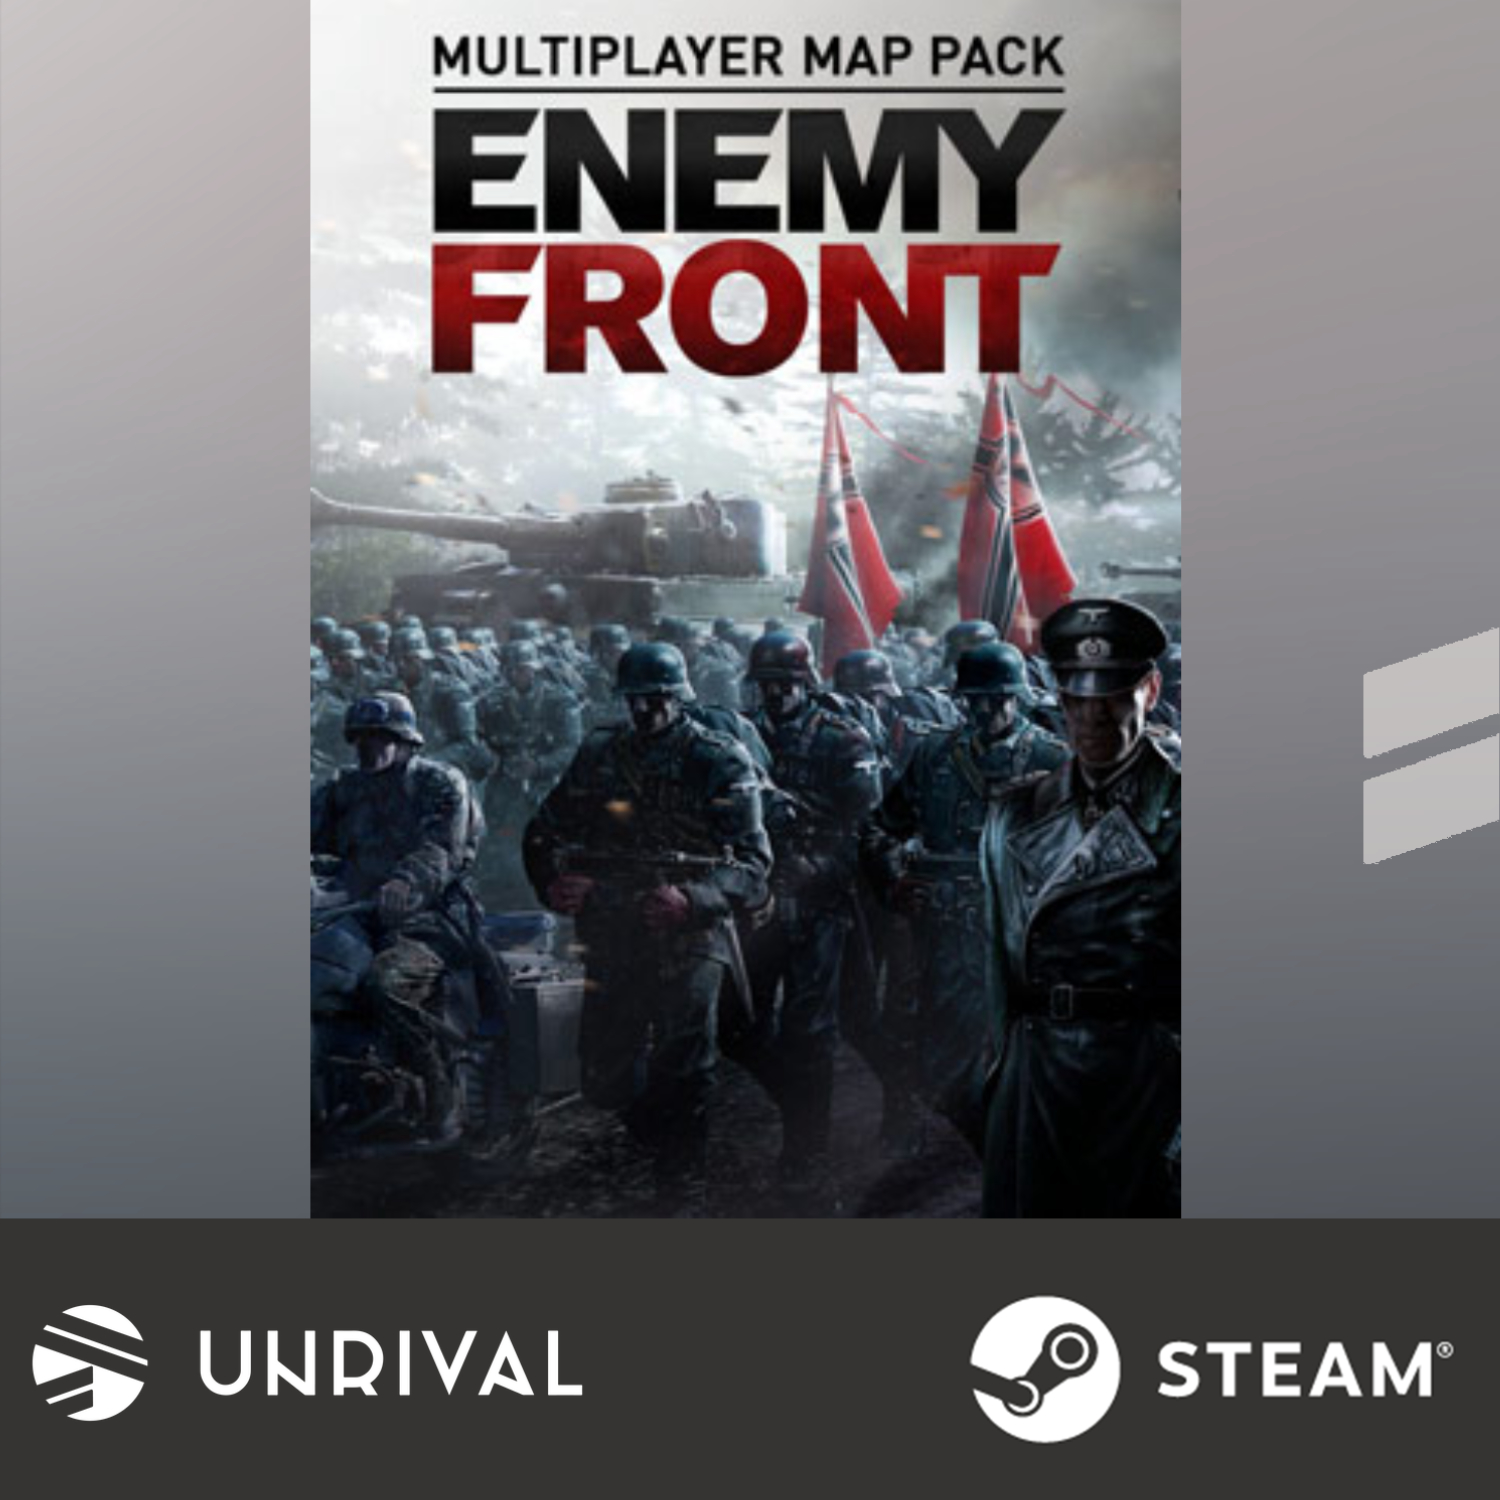 Enemy Front Multiplayer Map Pack (DLC) PC Digital Download Game - Unrival